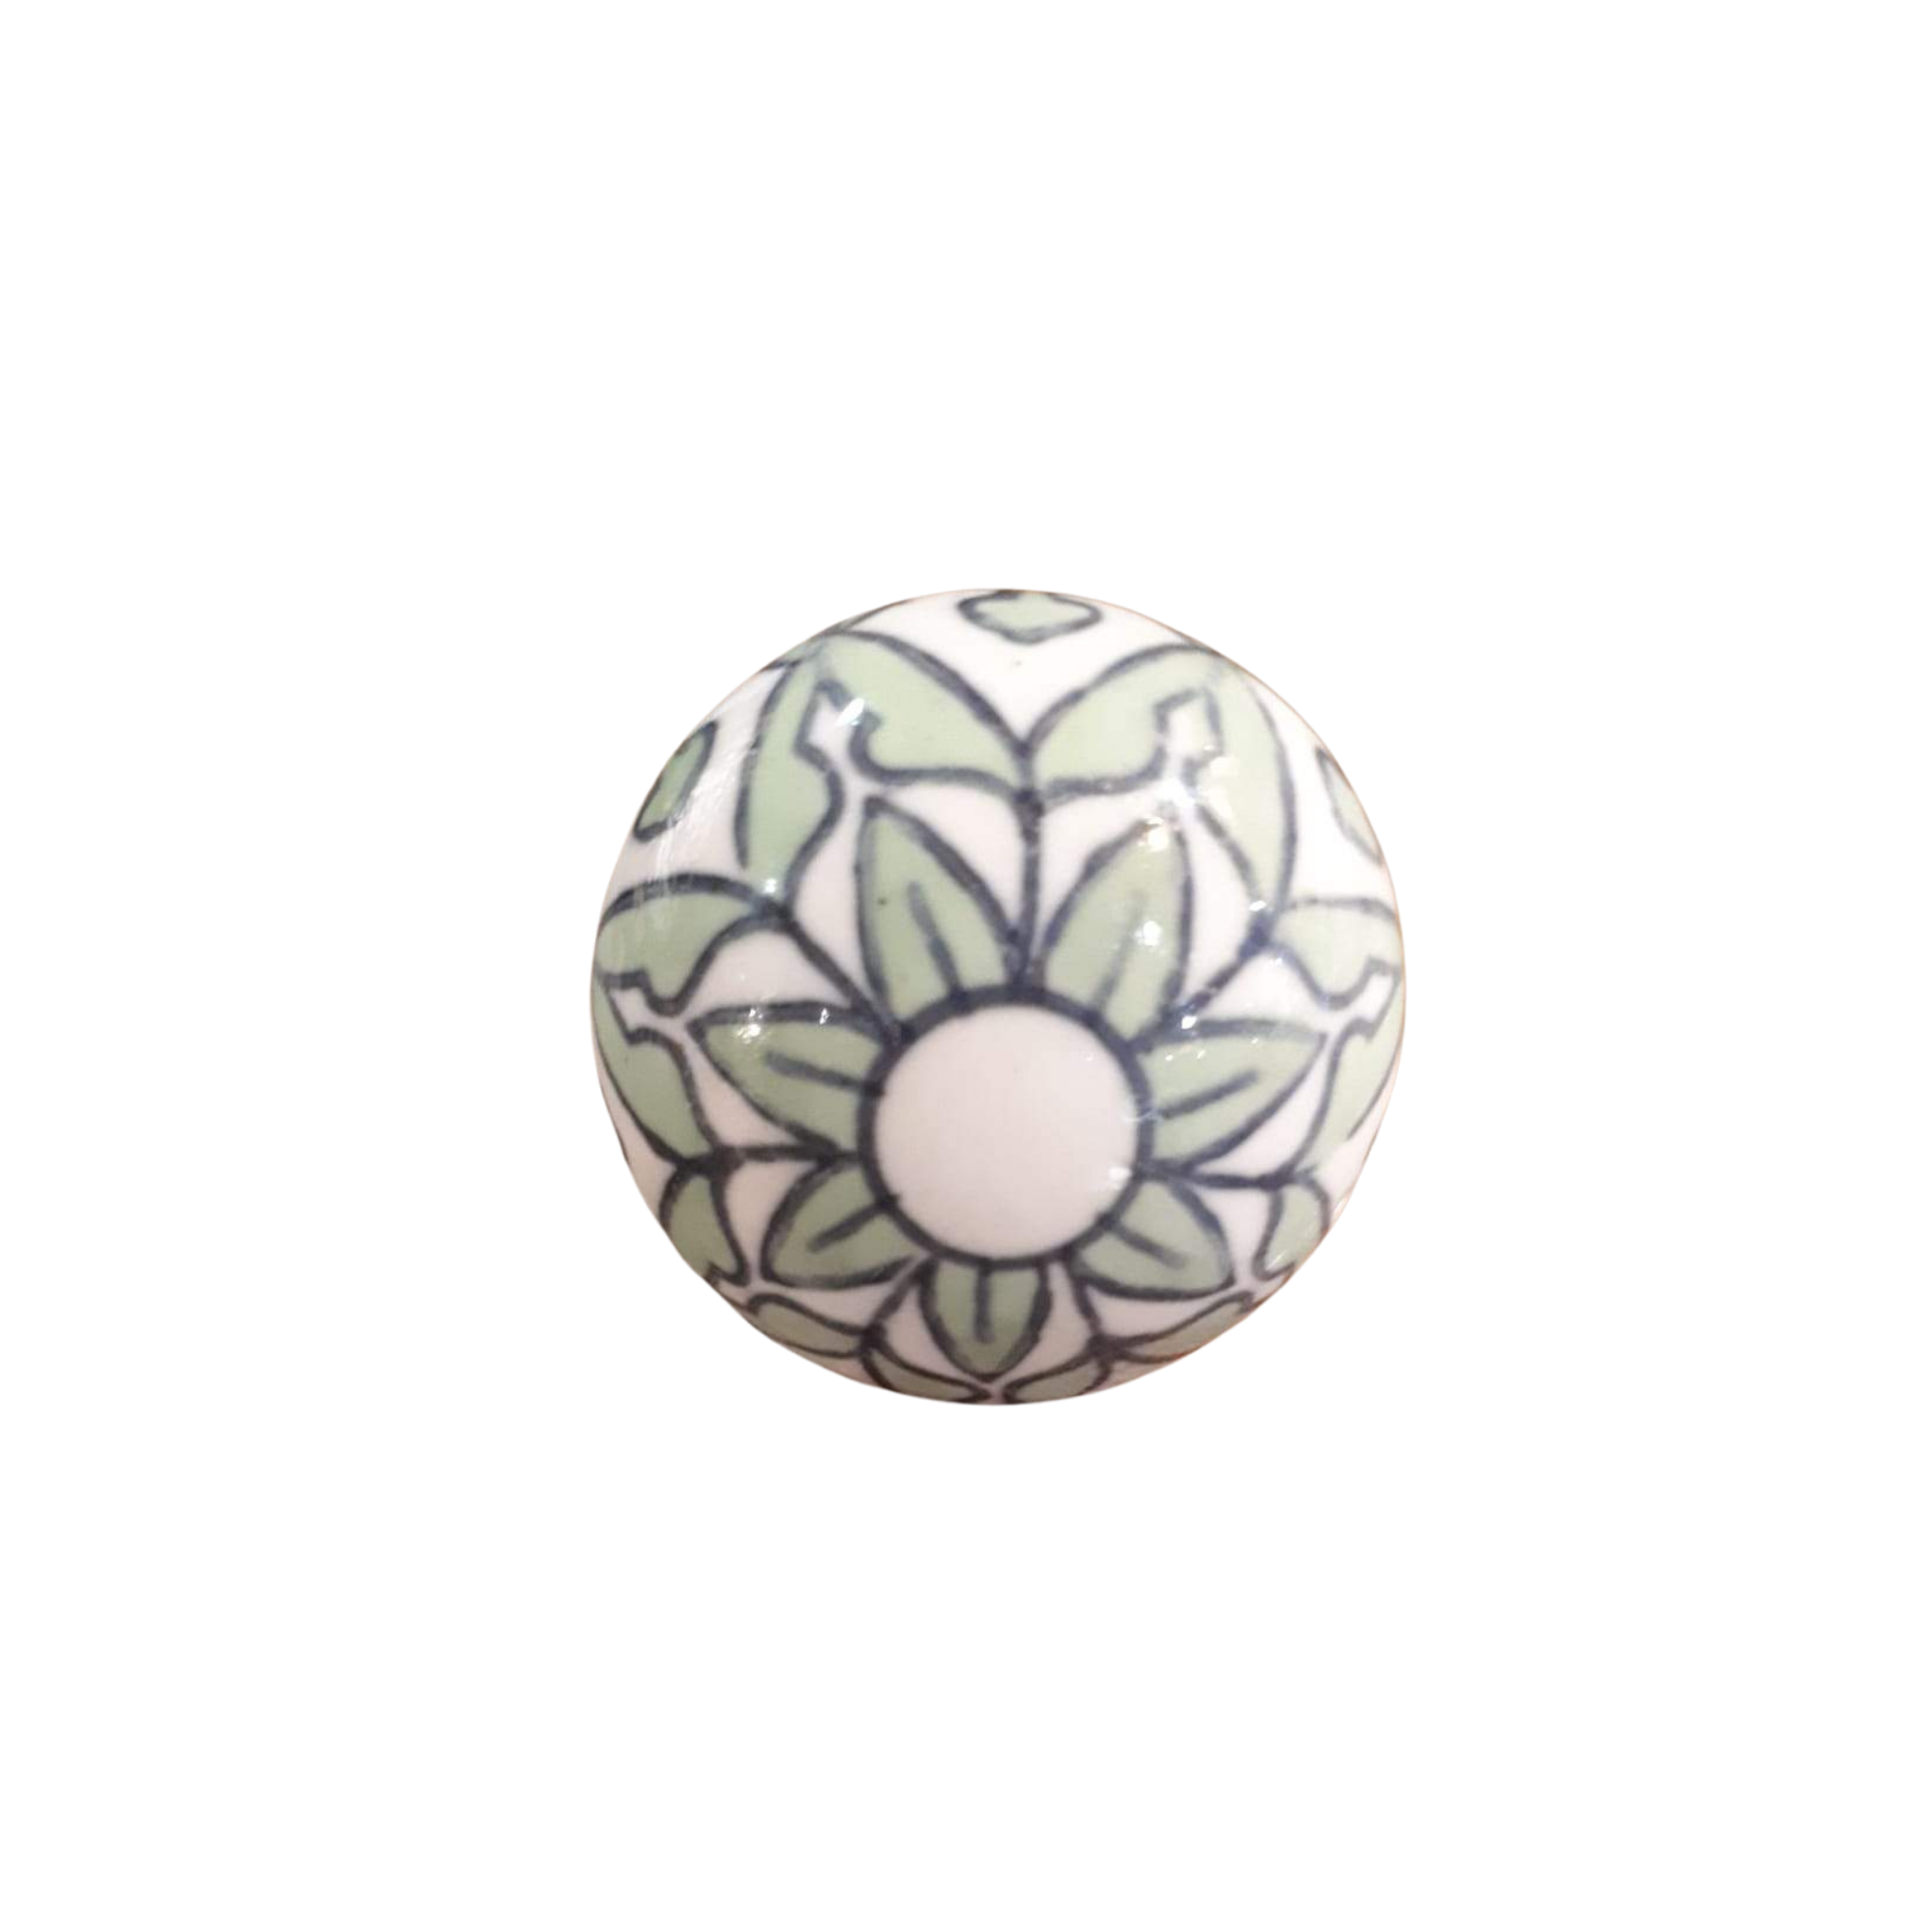 Stunning green ceramic knob with a flower pattern hand[painted 